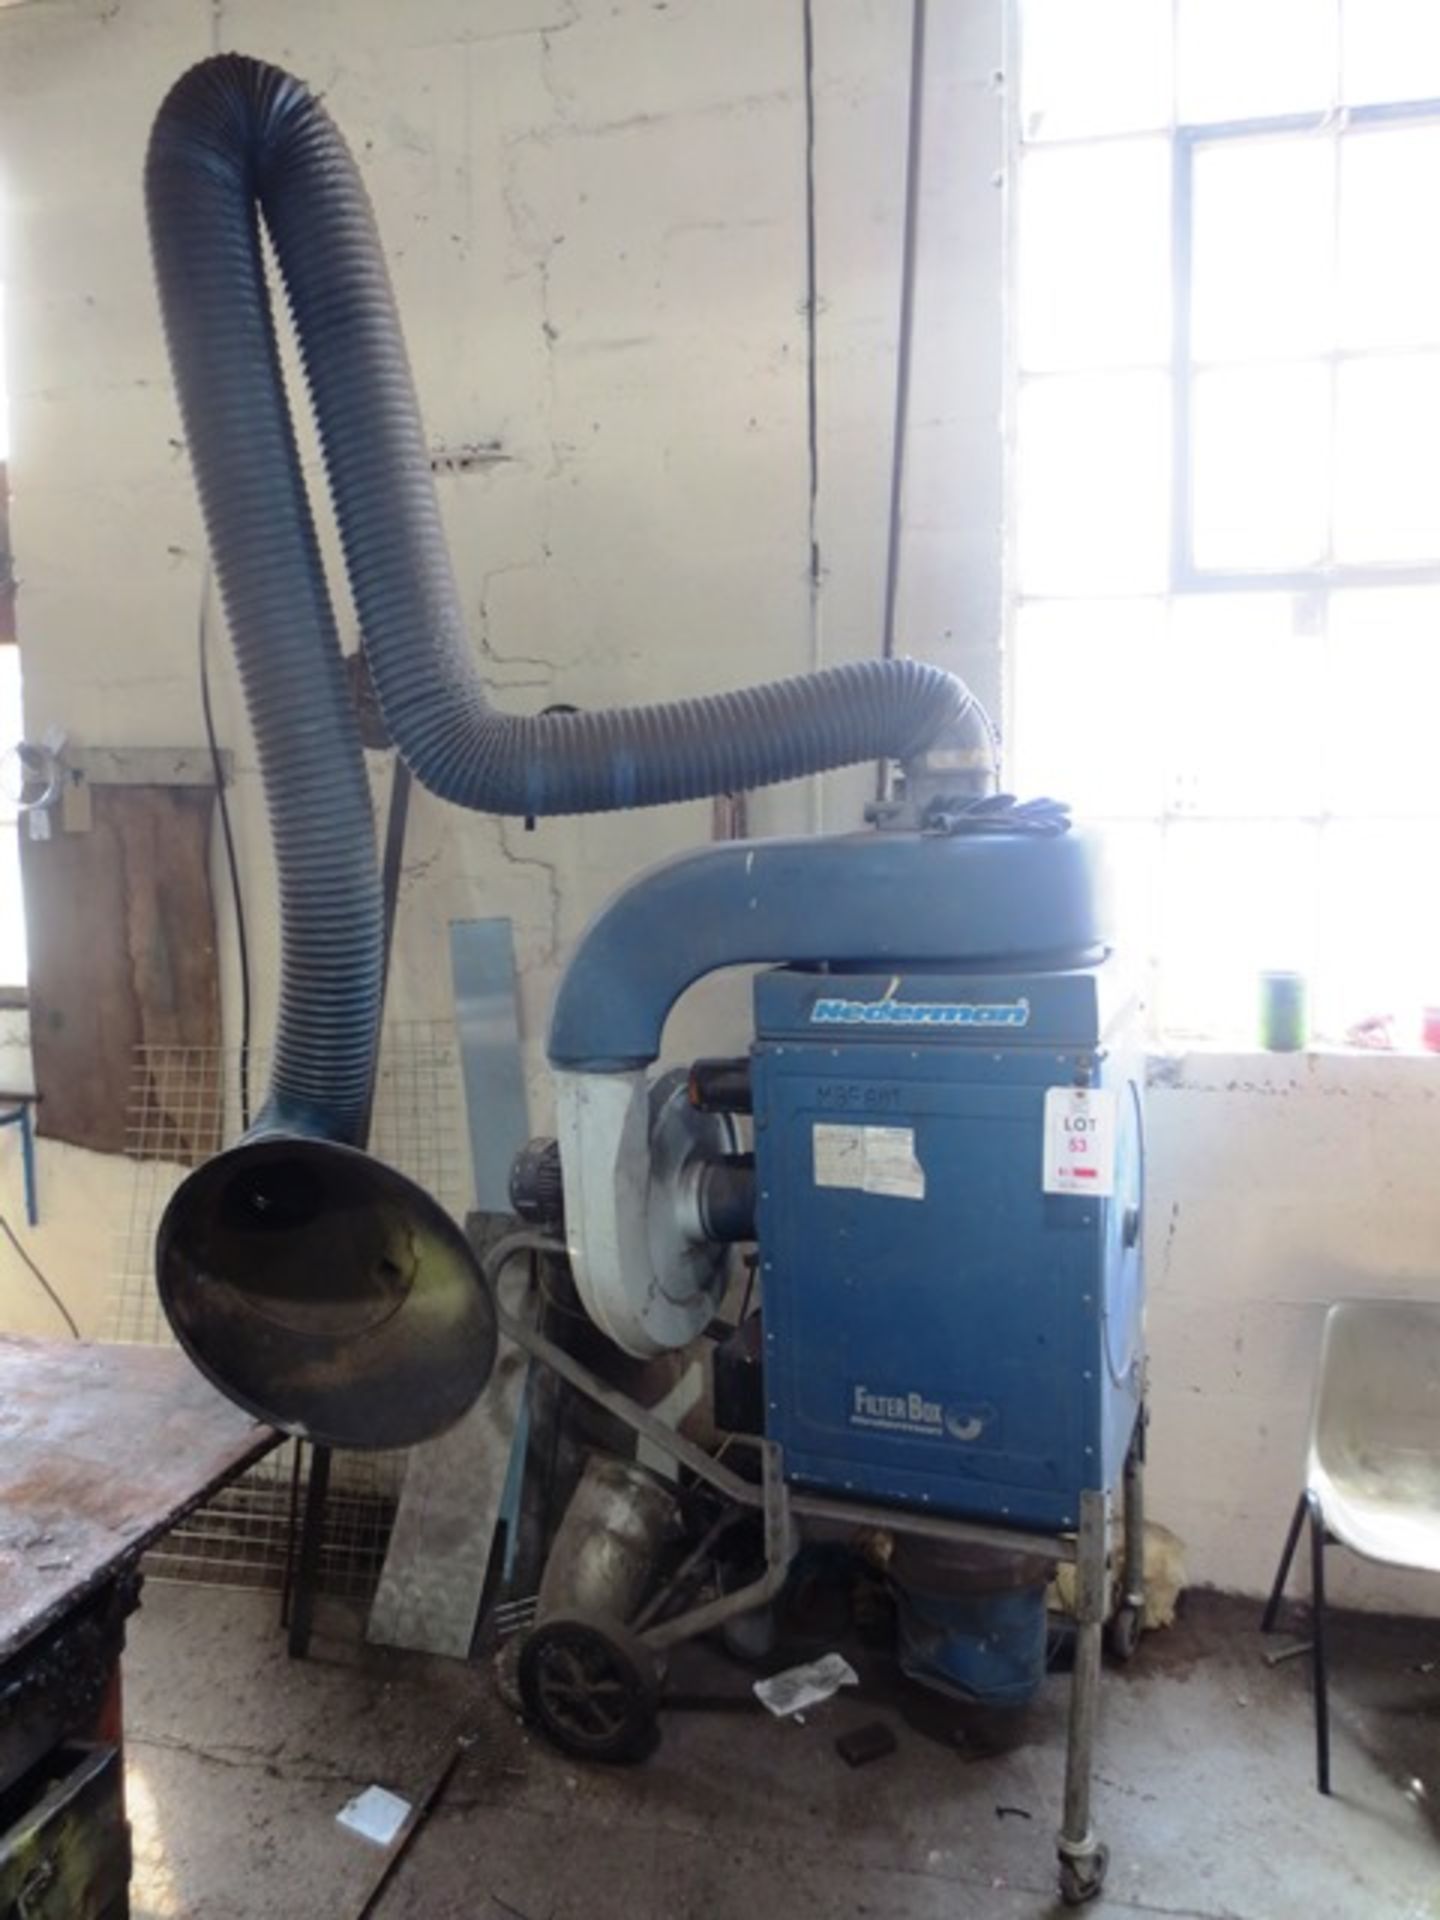 Nederman Filter box mobile extraction system, s/n: 663603763 (1998), Control no: 98040-00 (Please